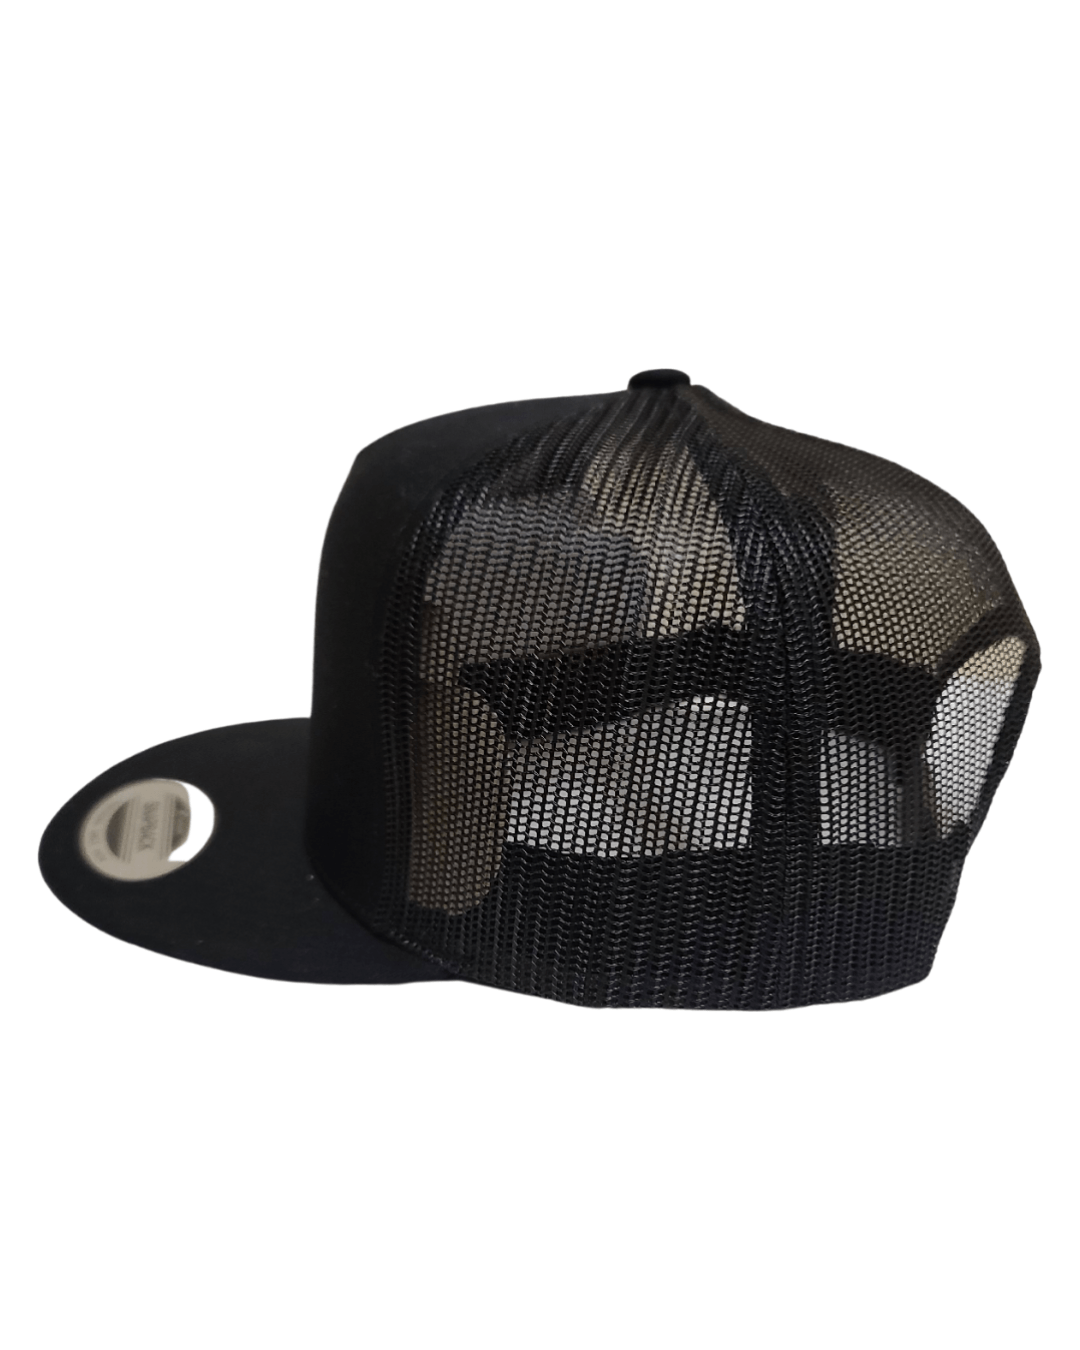 LyL Trucker Hat - Leave Your Legacy Clothing